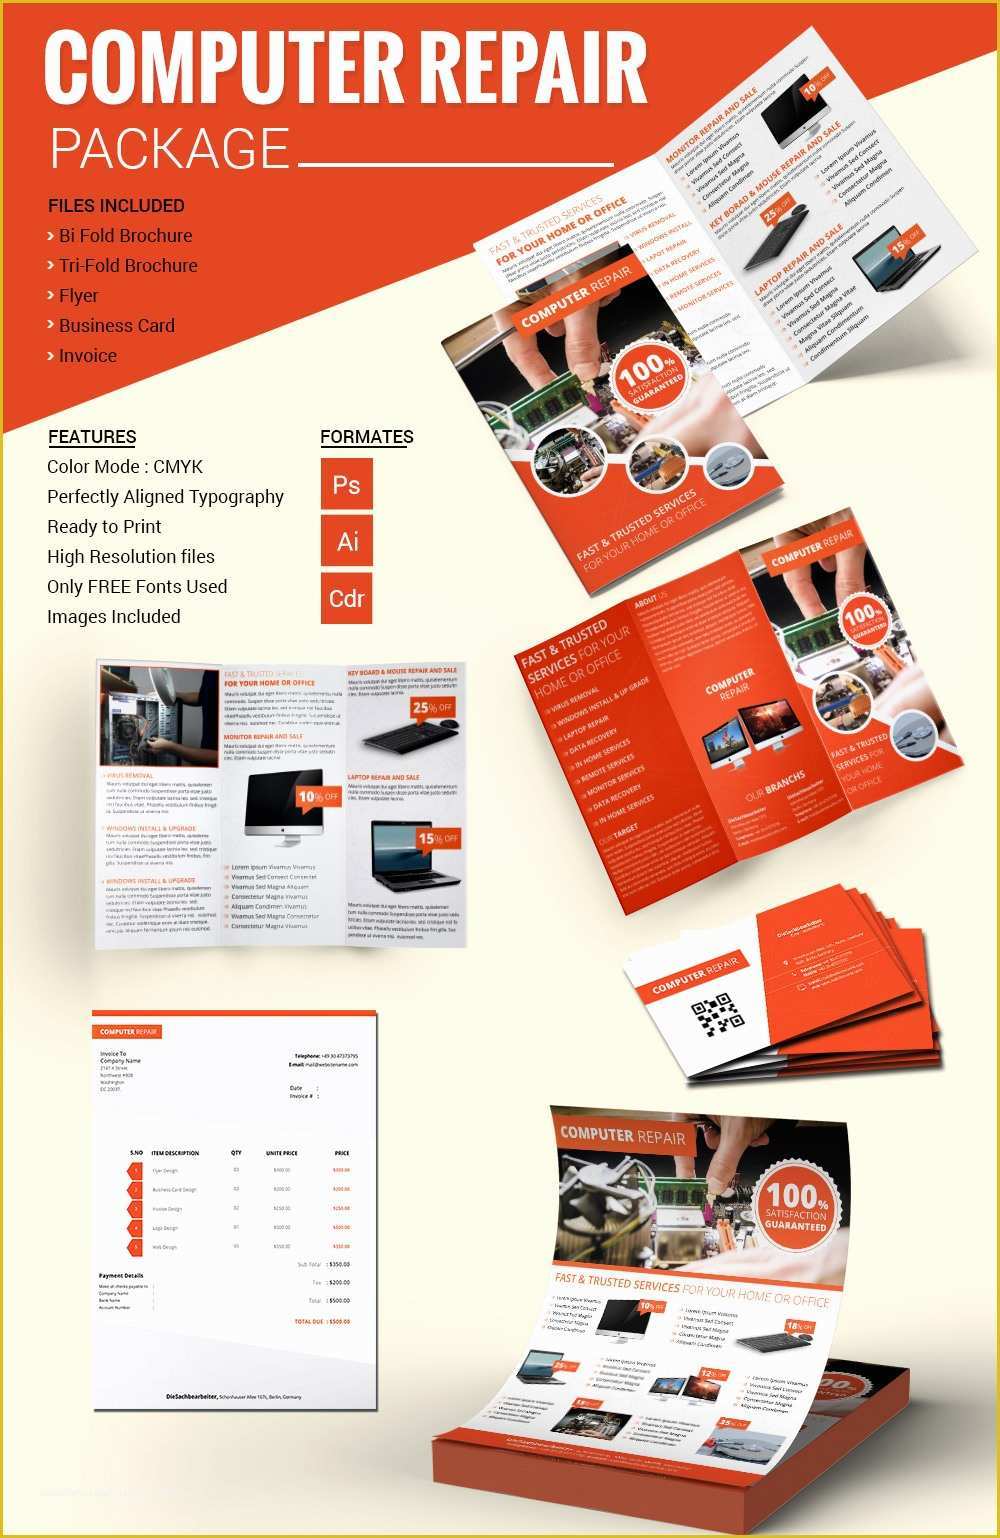 Laptop Website Templates Free Download Of Puter Repair Flyer Word Template Yourweek 66a18deca25e